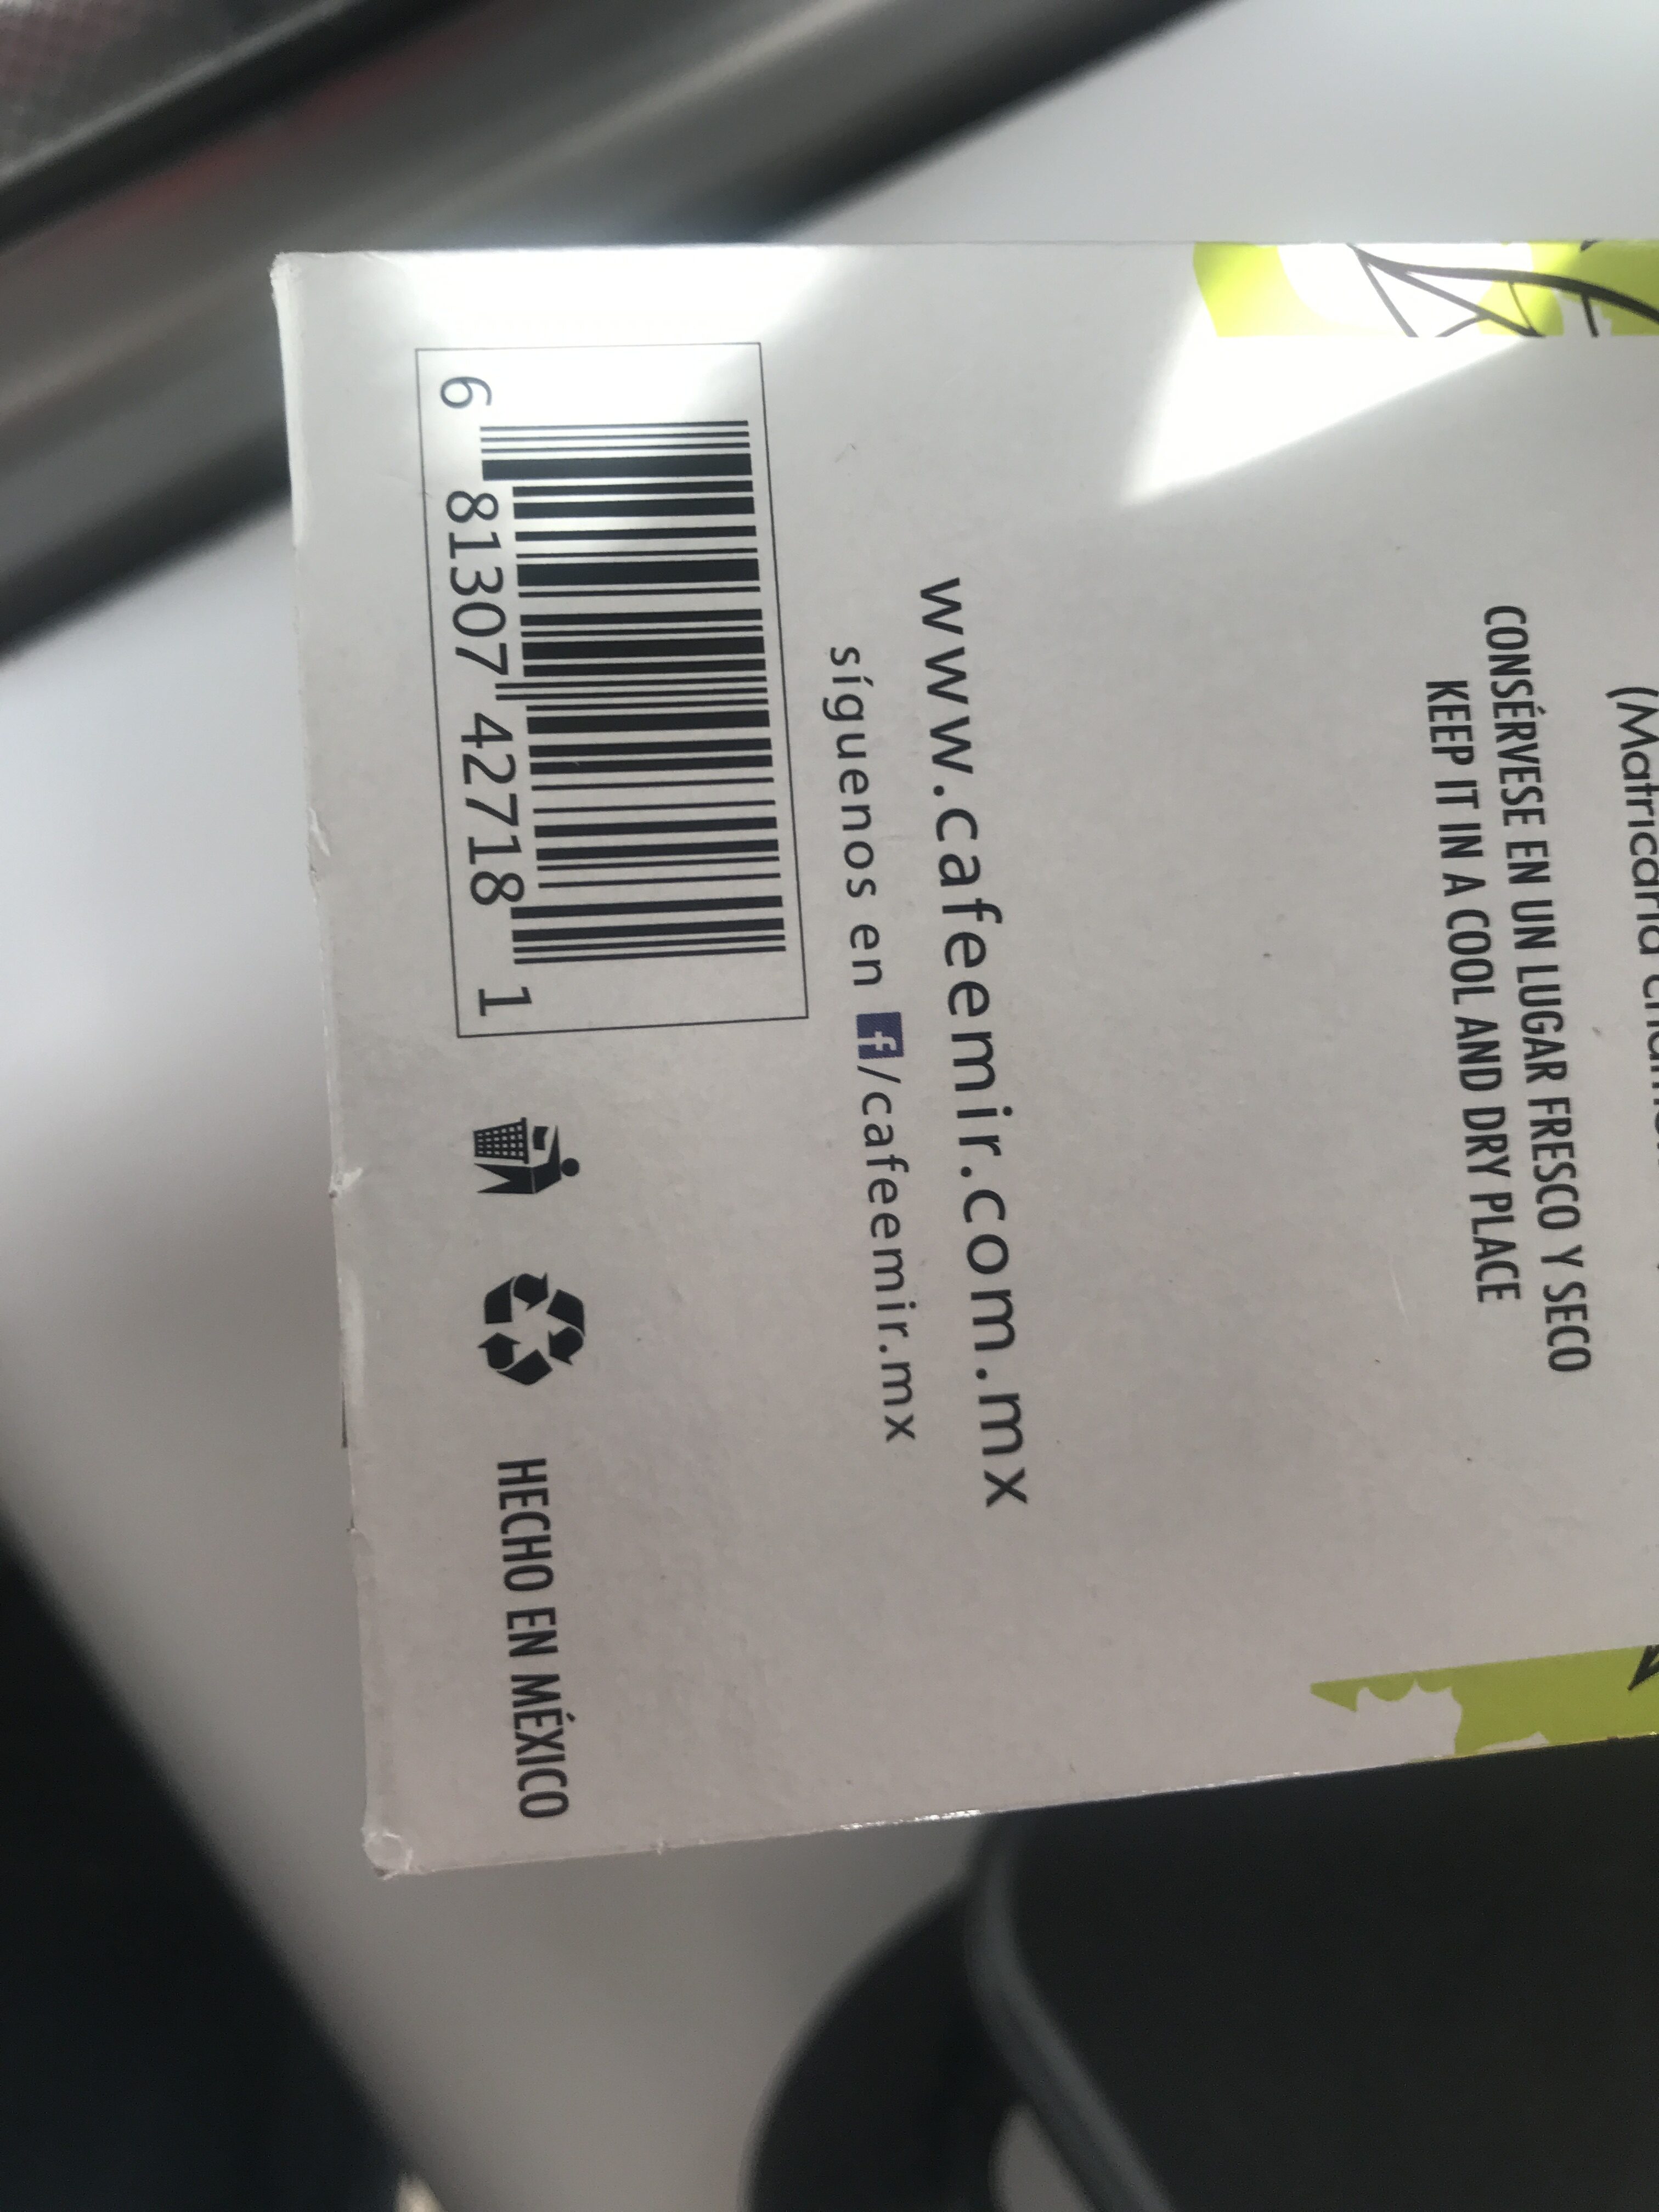 Té de manzanilla - Recycling instructions and/or packaging information